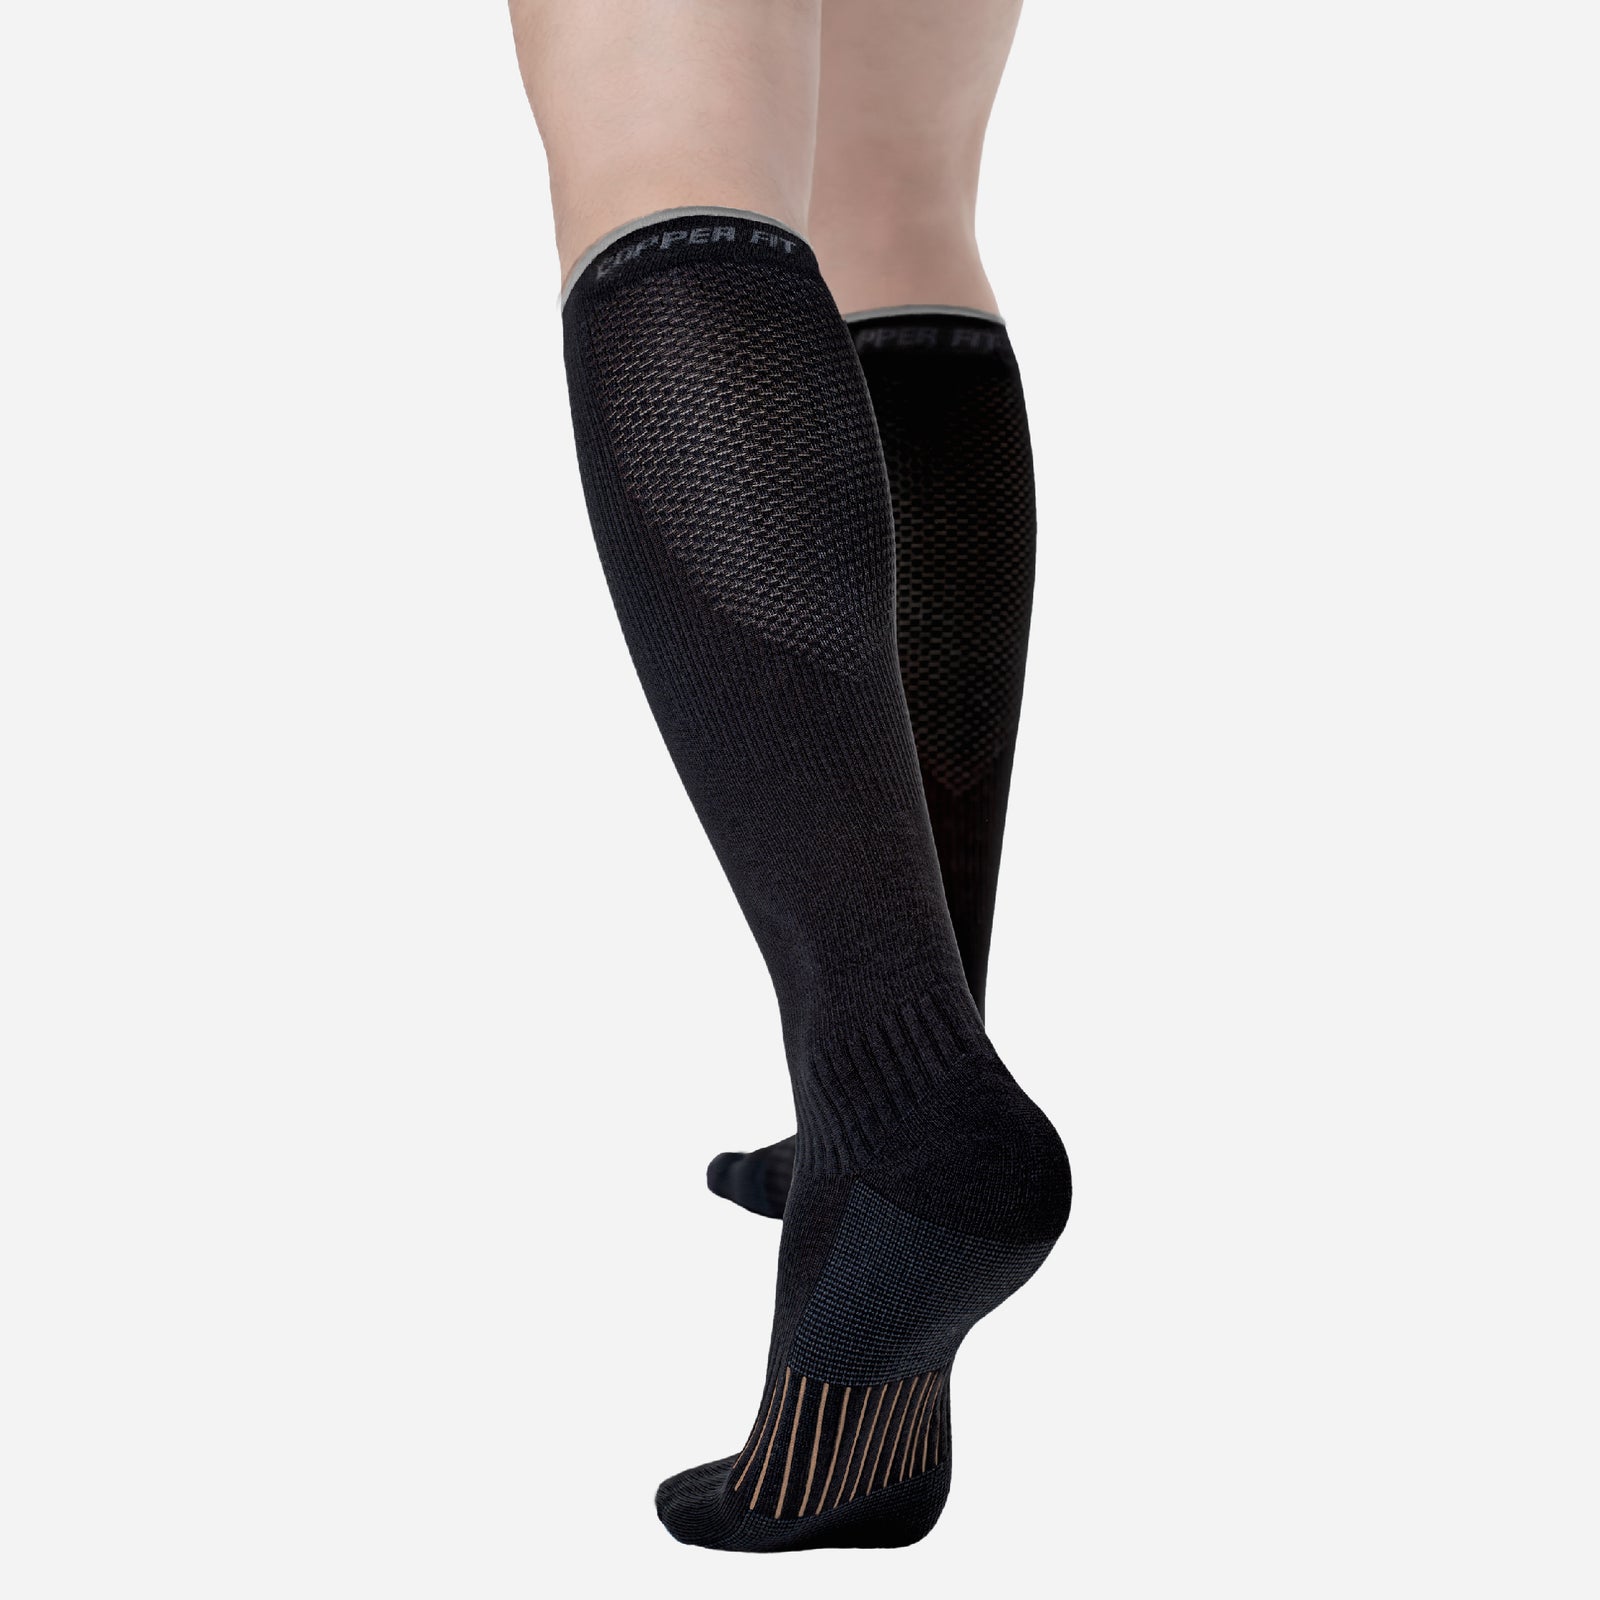 Ice Compression Socks: Menthol-Infused Cooling - Copper Fit